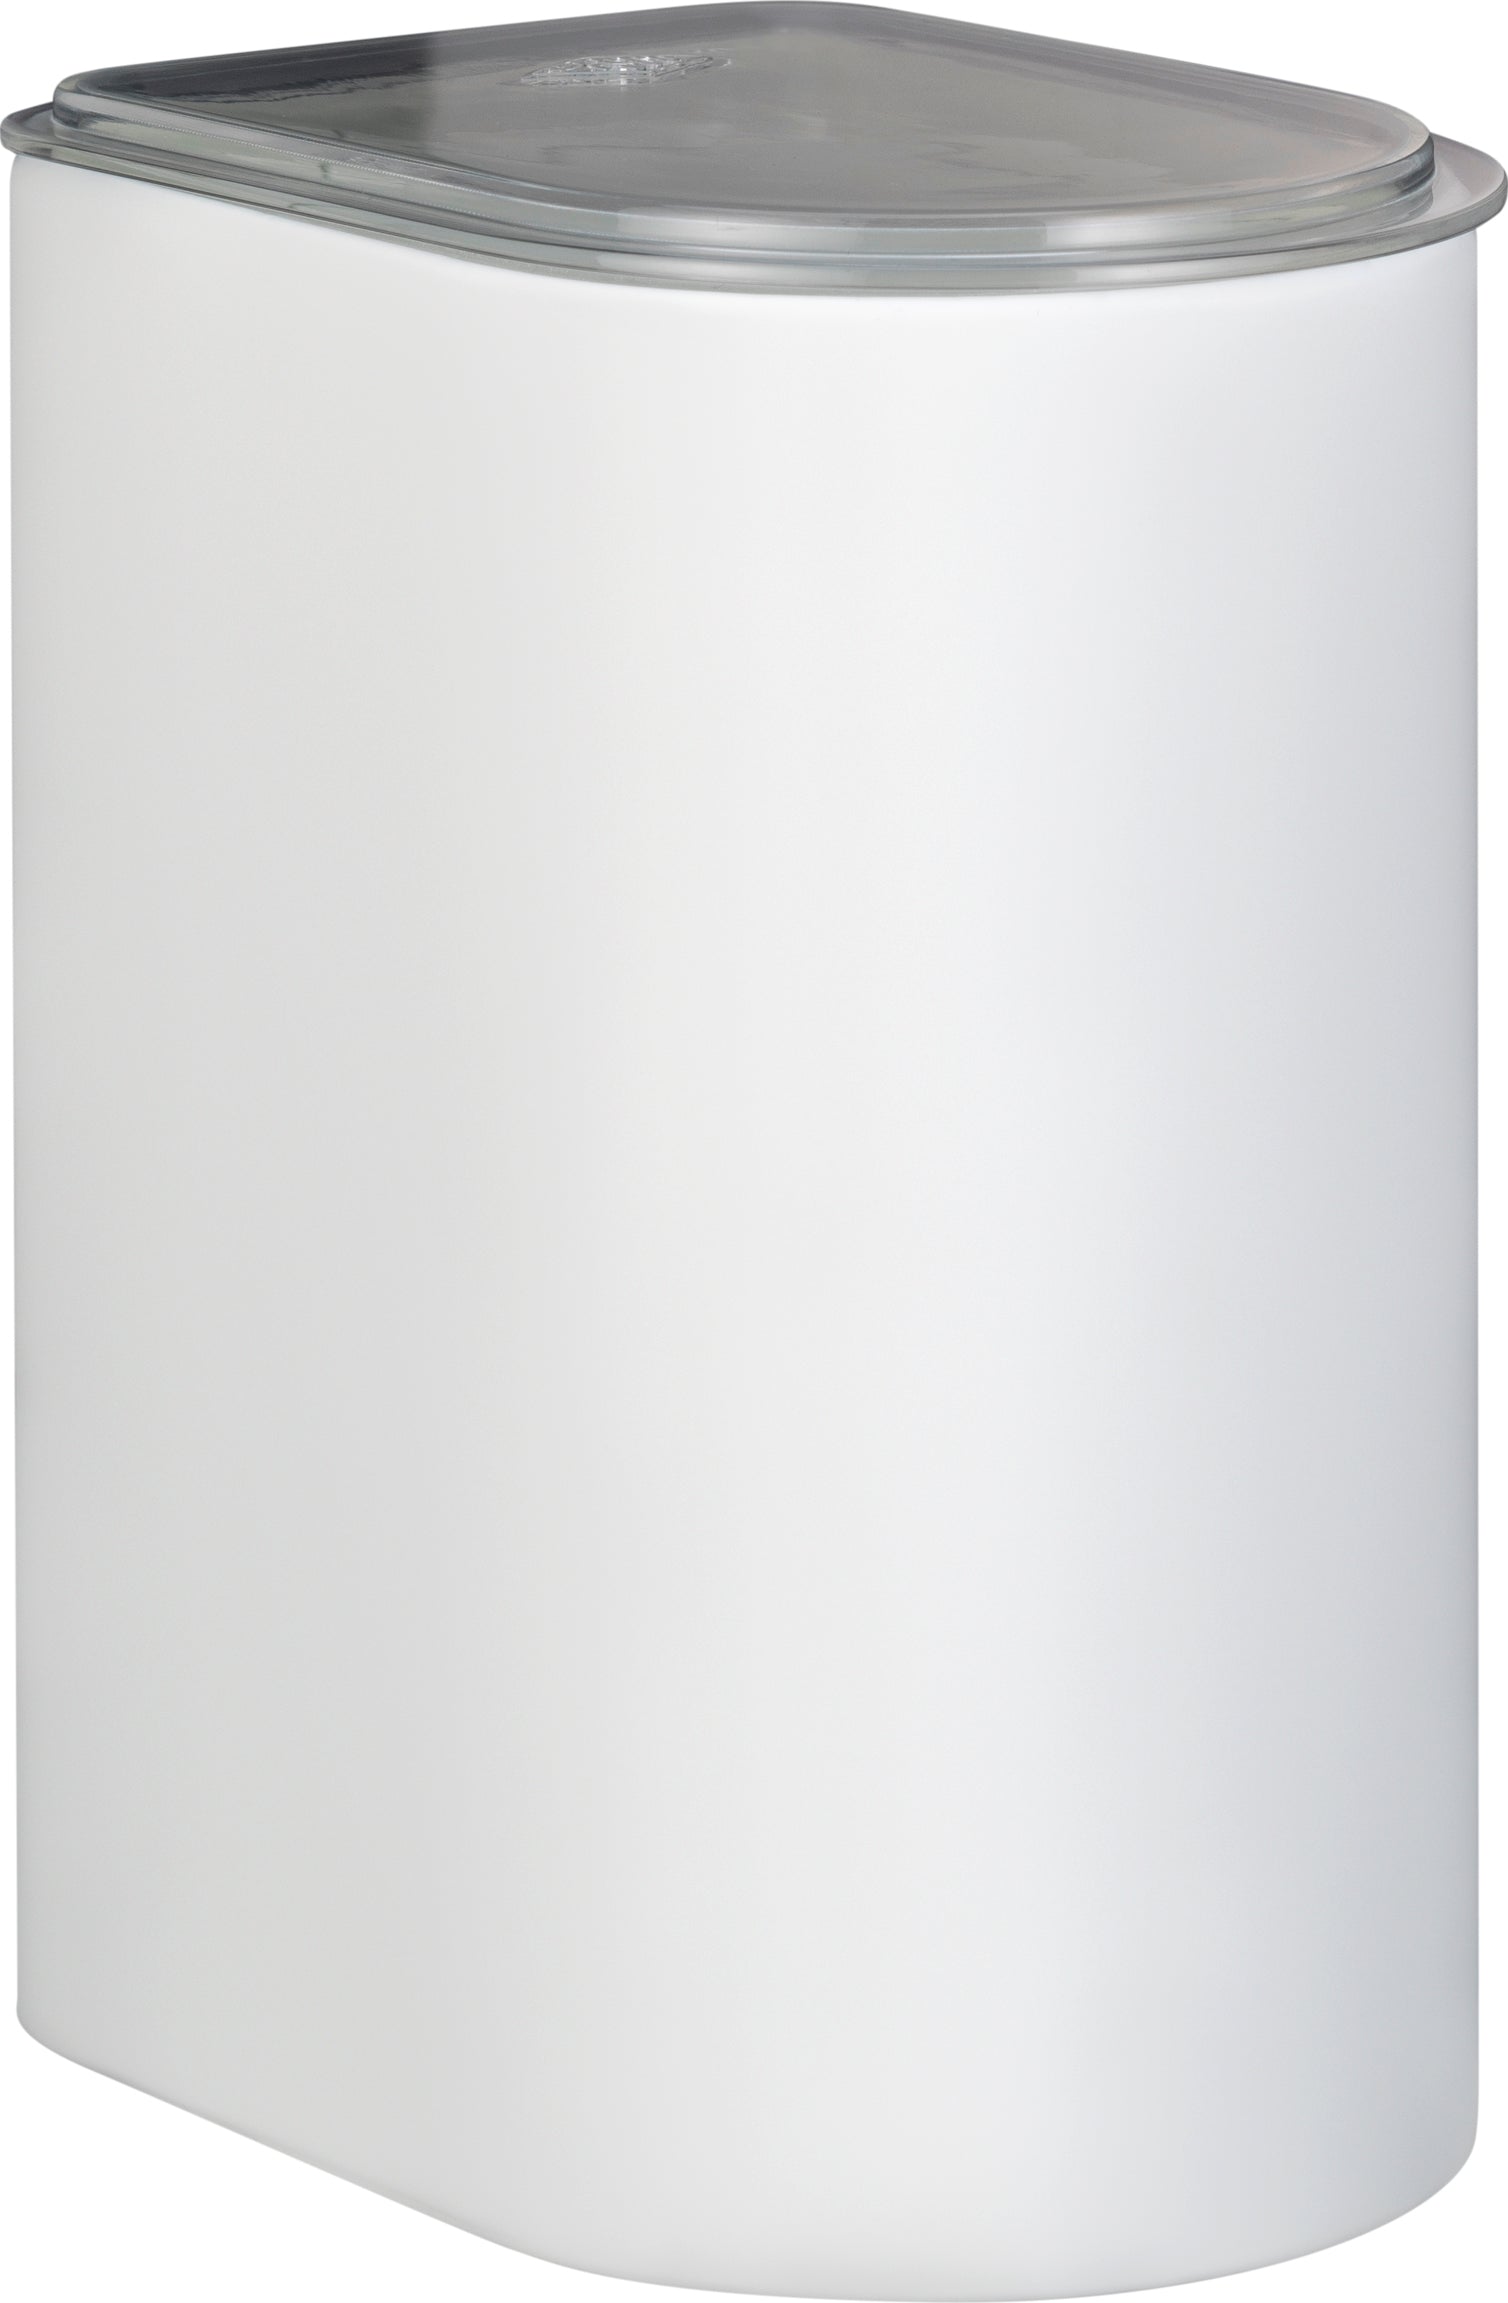 Wesco Canister 3 Litre With Acrylic Lid, White Matt